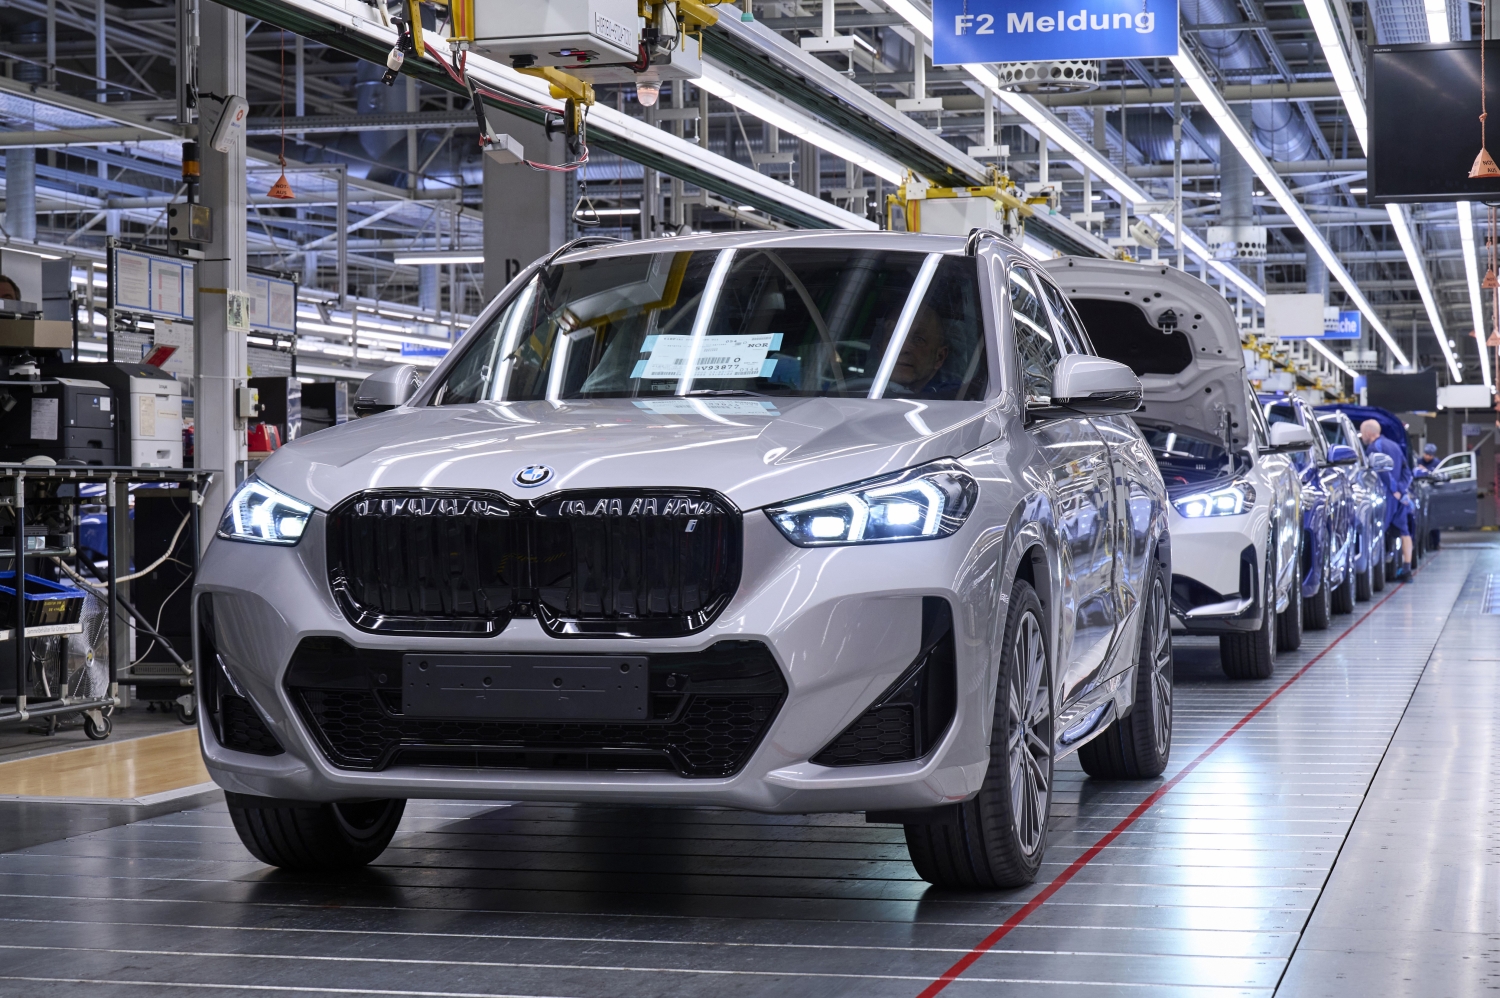 BMW By 2024, 1 in 3 BMWs produced in Bavarian plants will be electric